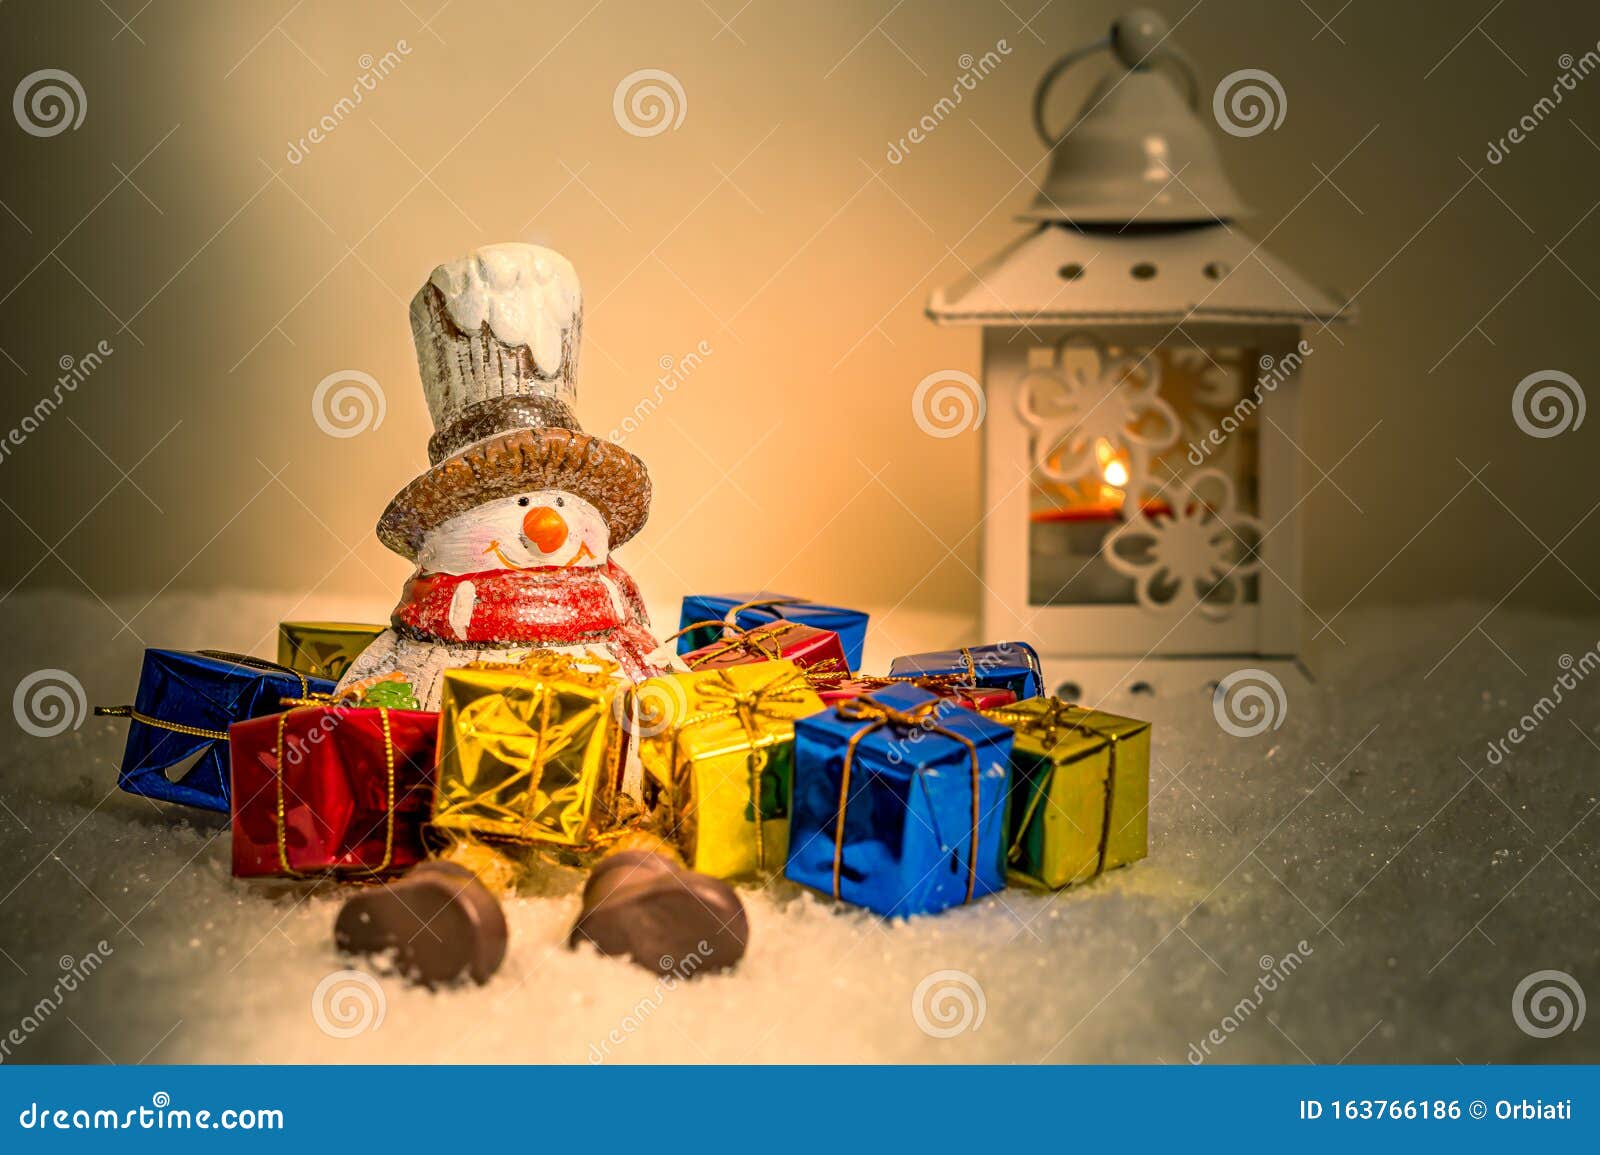 Snowman With Gift Boxes Simulated Snowfall In The Background With A Candle Holder Stock Photo Image Of Throw Simulated